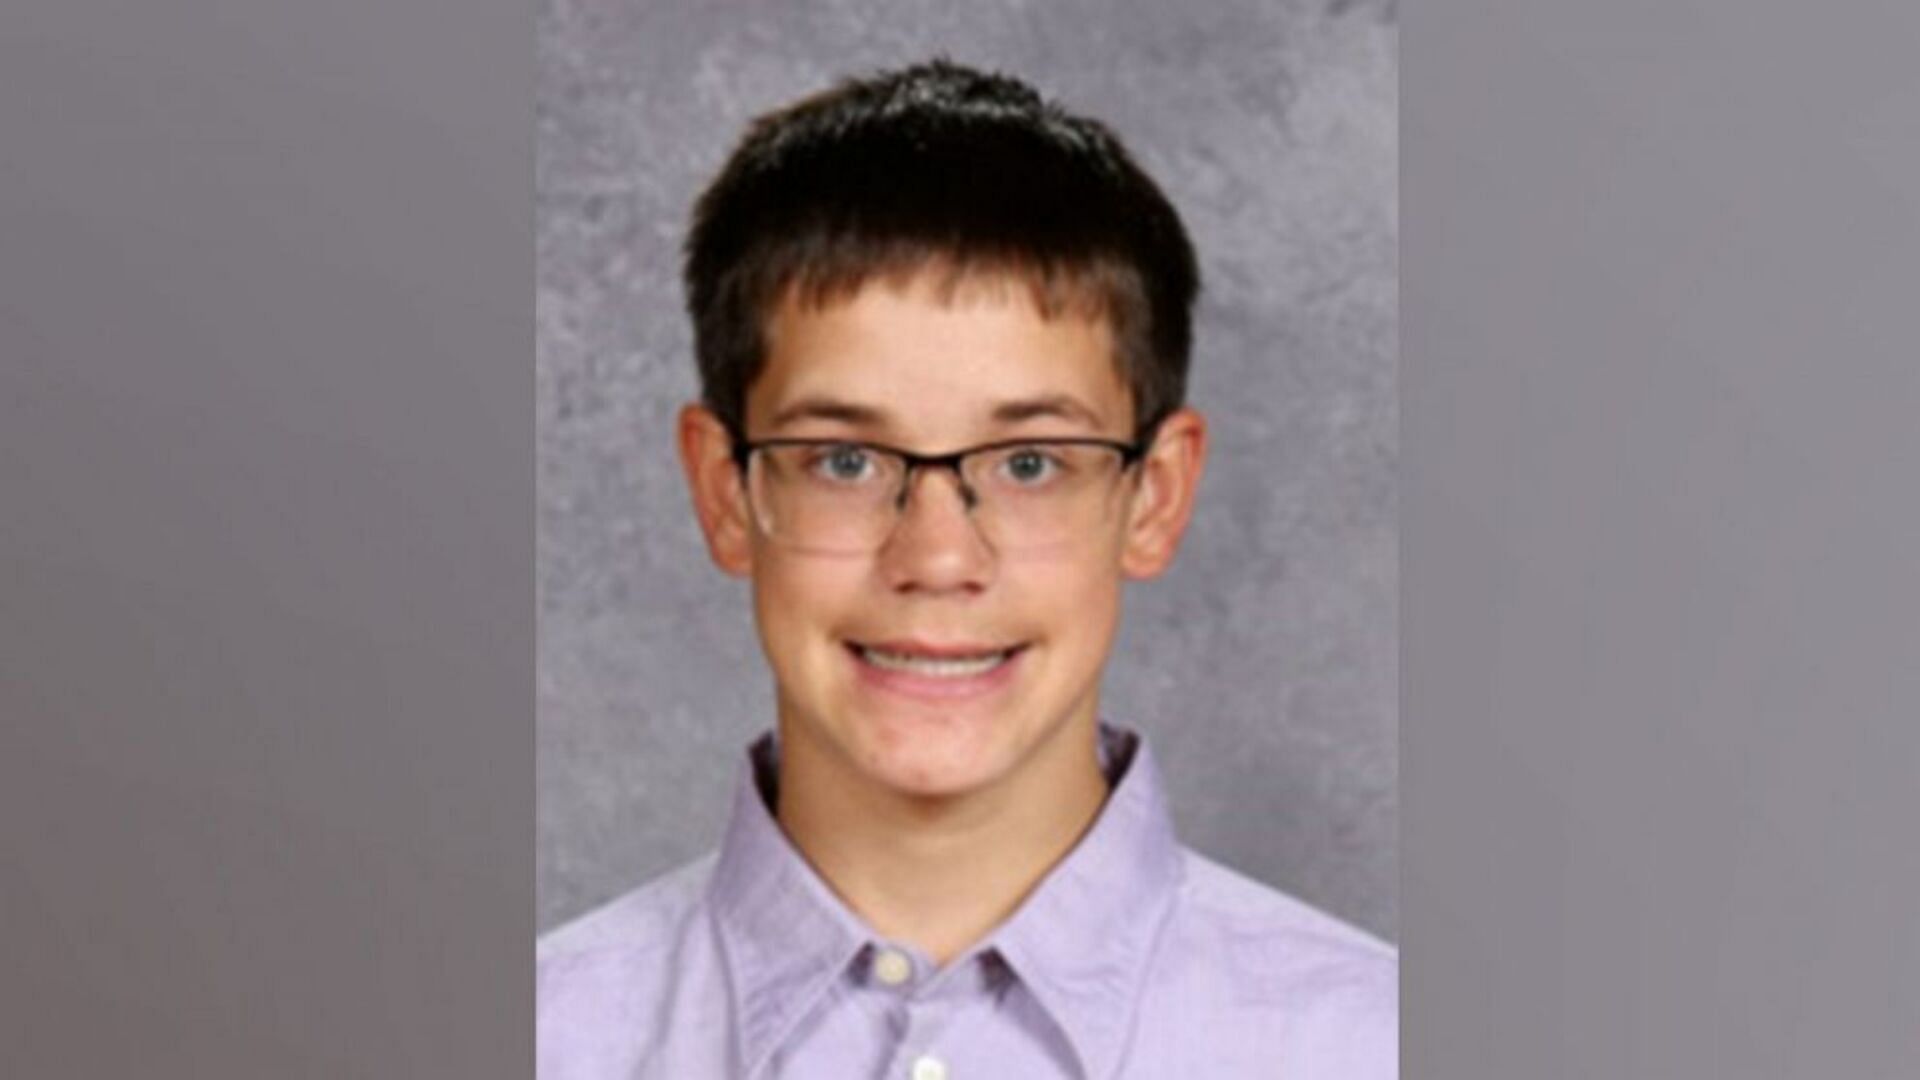 14-year-old Scottie Morris of Indiana is missing and is believed to be in danger. (Image via Facebook/Eaton Indiana Police Department)